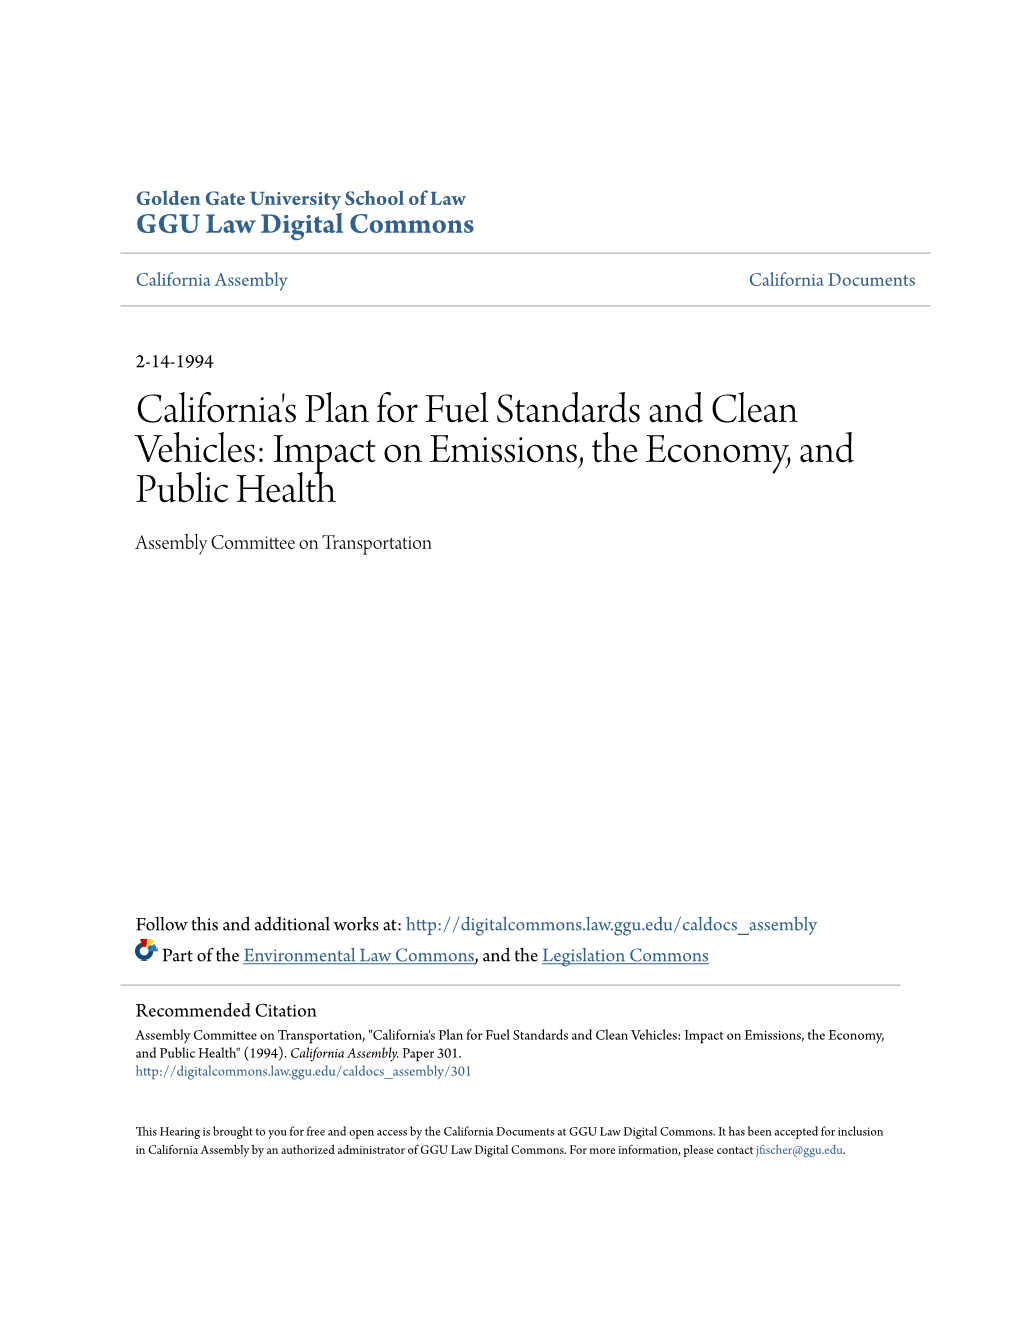 California's Plan for Fuel Standards and Clean Vehicles: Impact on Emissions, the Economy, and Public Health Assembly Committee on Transportation